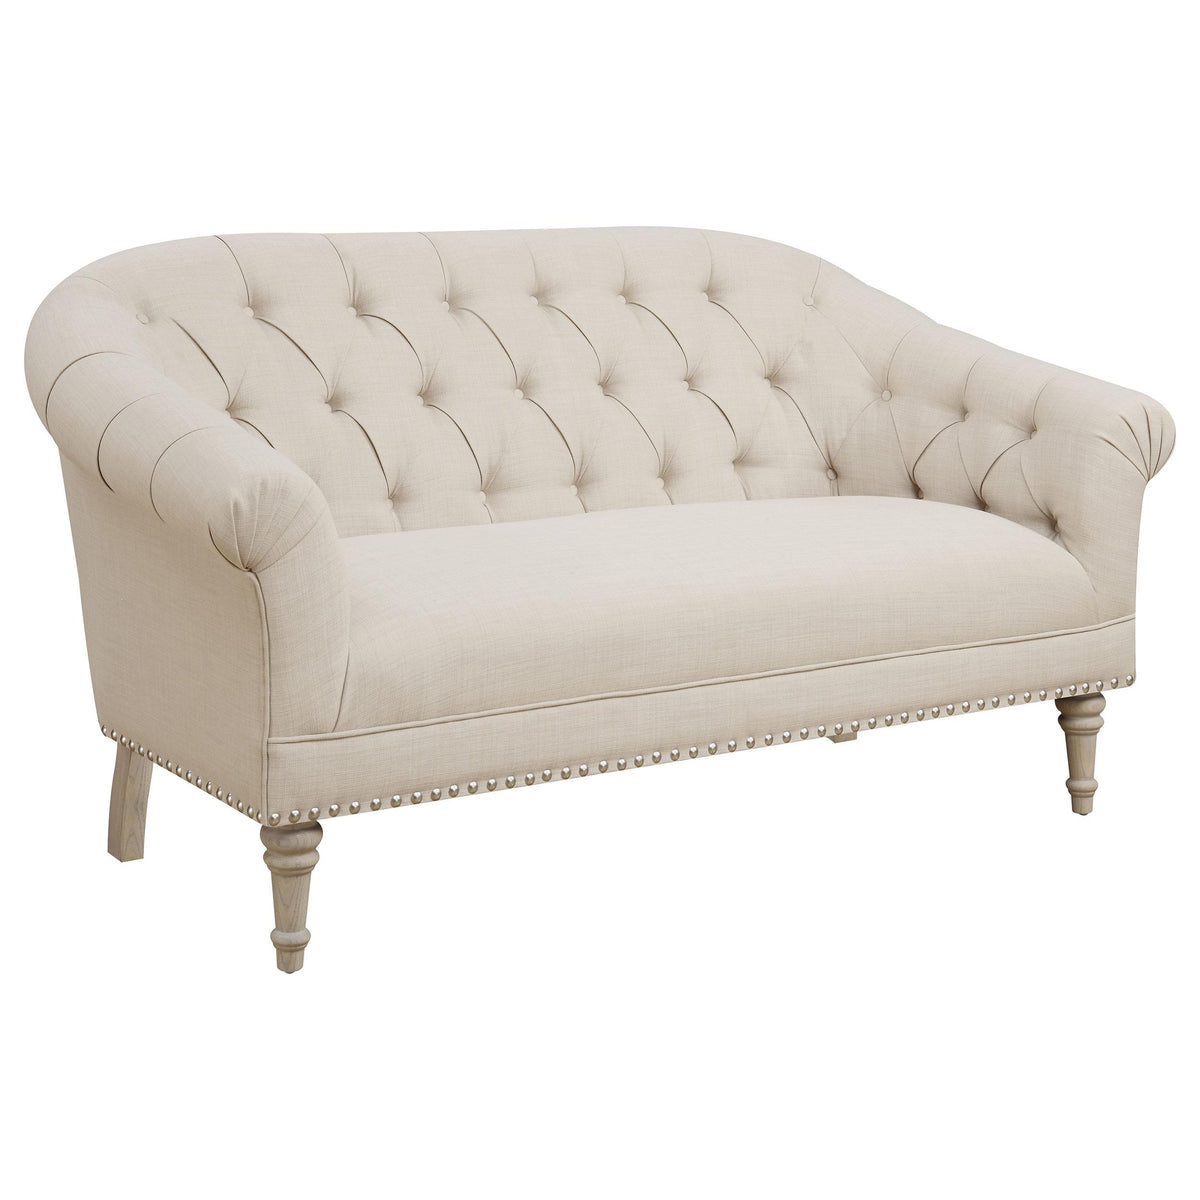 Billie Tufted Back Settee with Roll Arm Natural Billie Tufted Back Settee with Roll Arm Natural Half Price Furniture